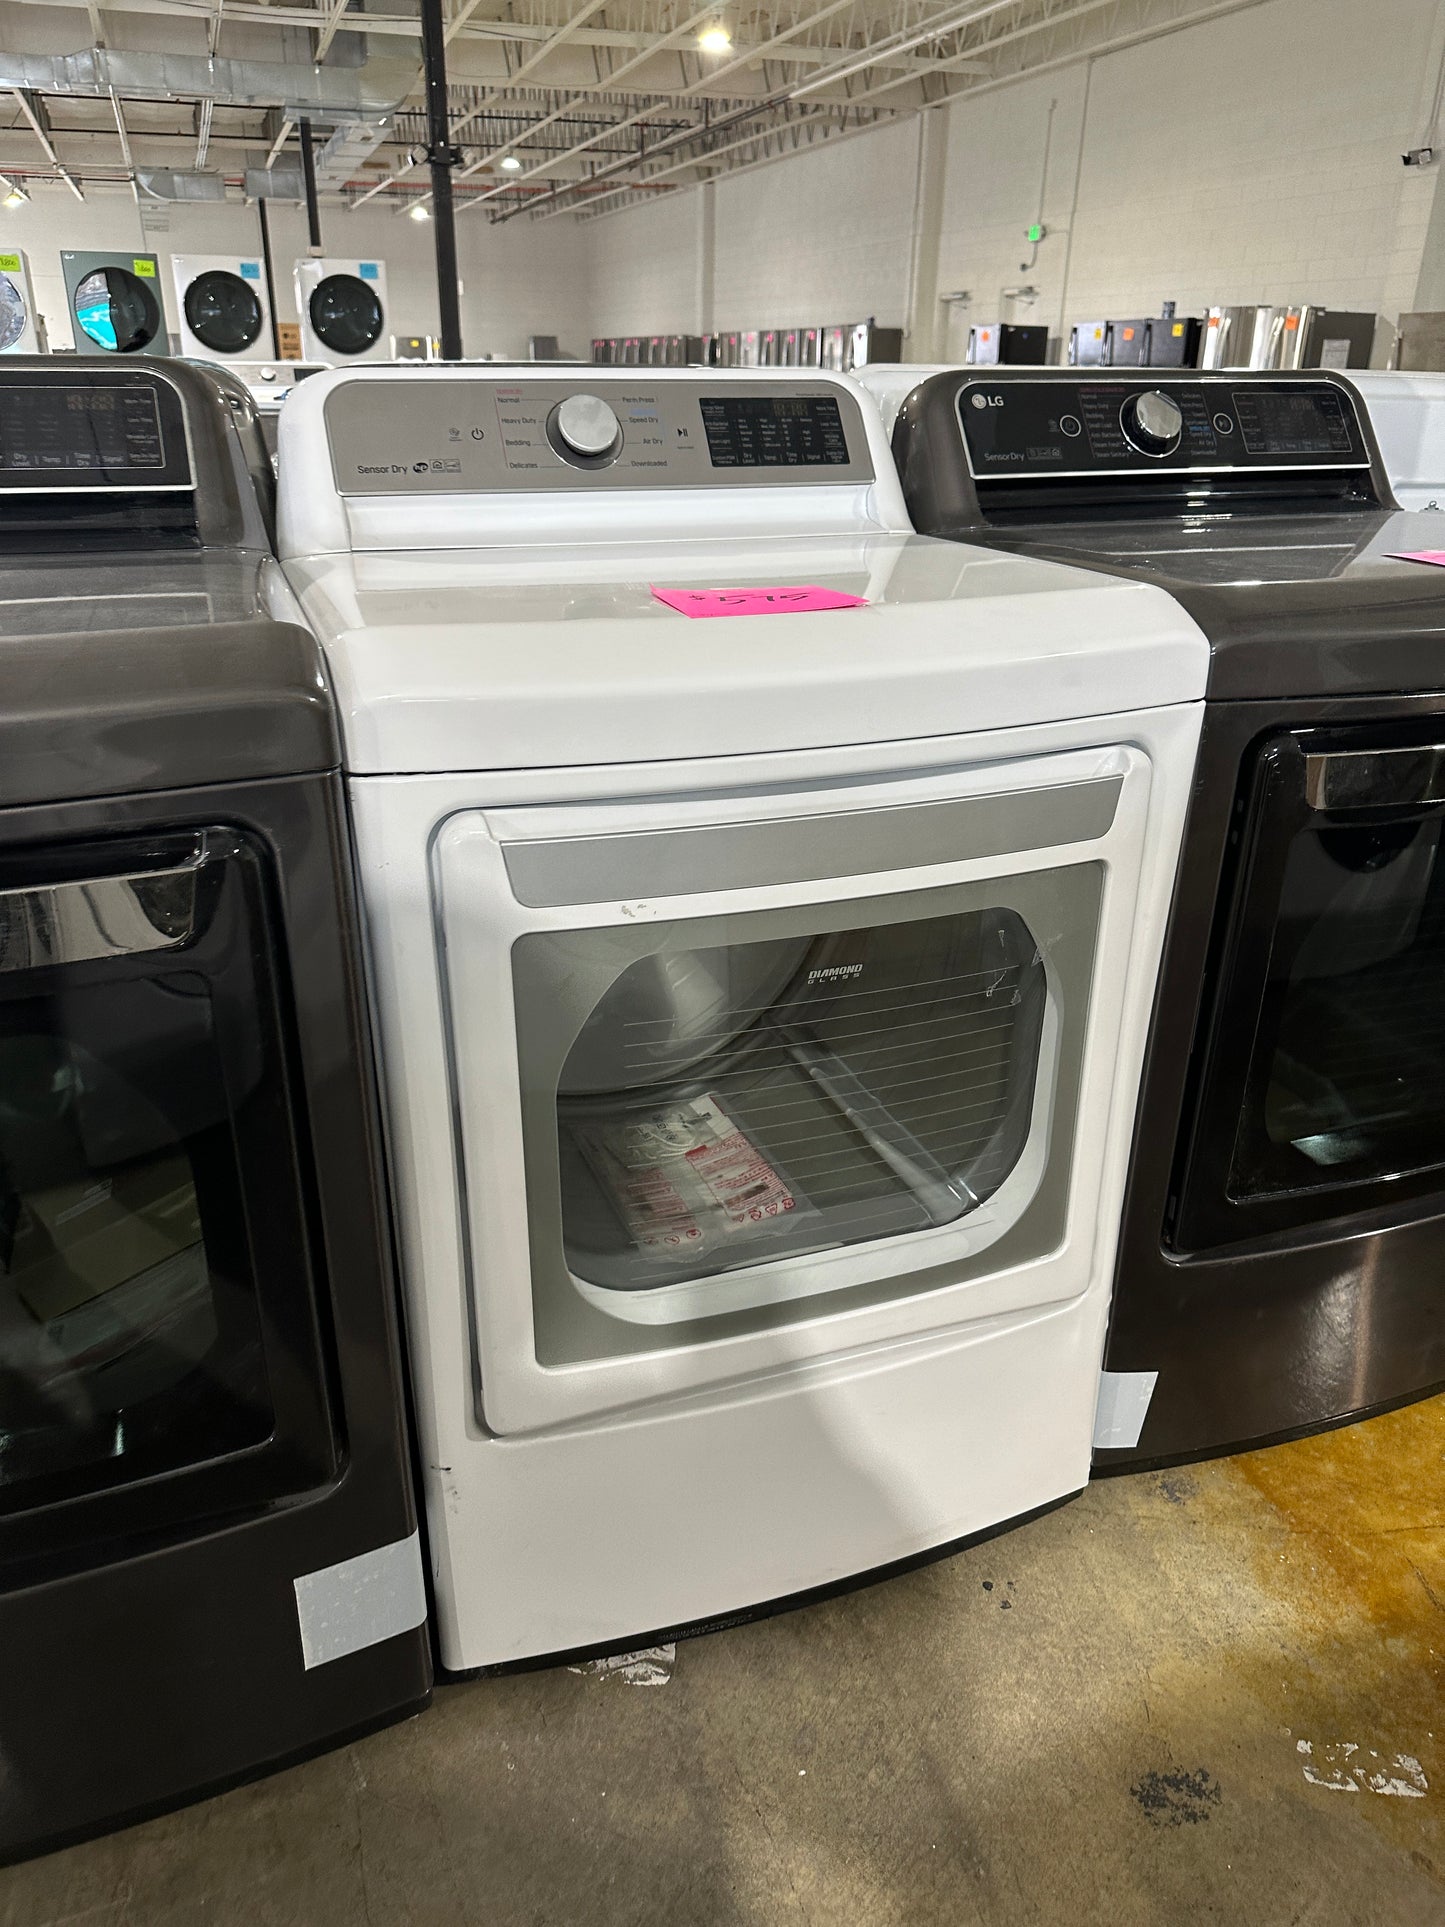 LG - 7.3 Cu. Ft. Smart Electric Dryer with EasyLoad Door - White  Model:DLE7400WE  DRY11162S